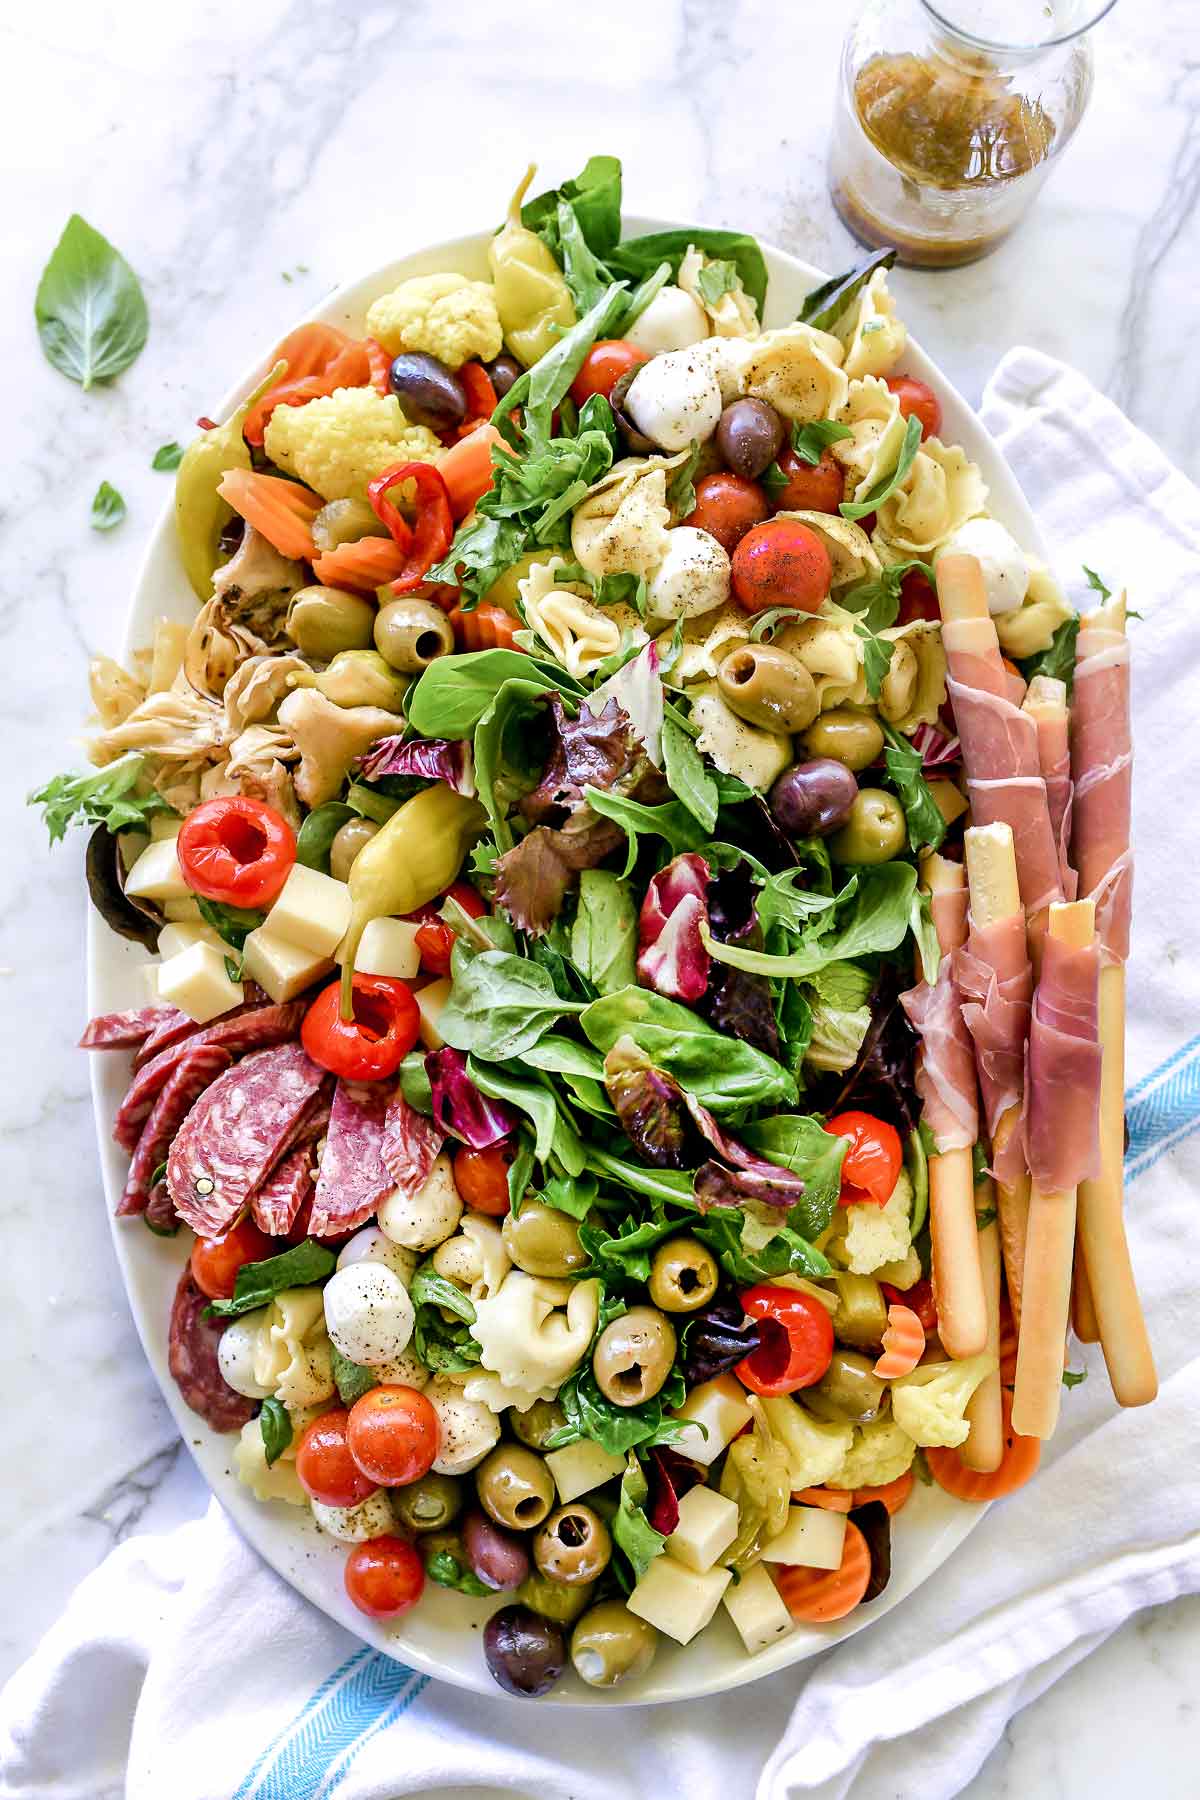 How to Make an Awesome Antipasto Salad Platter | foodiecrush.con